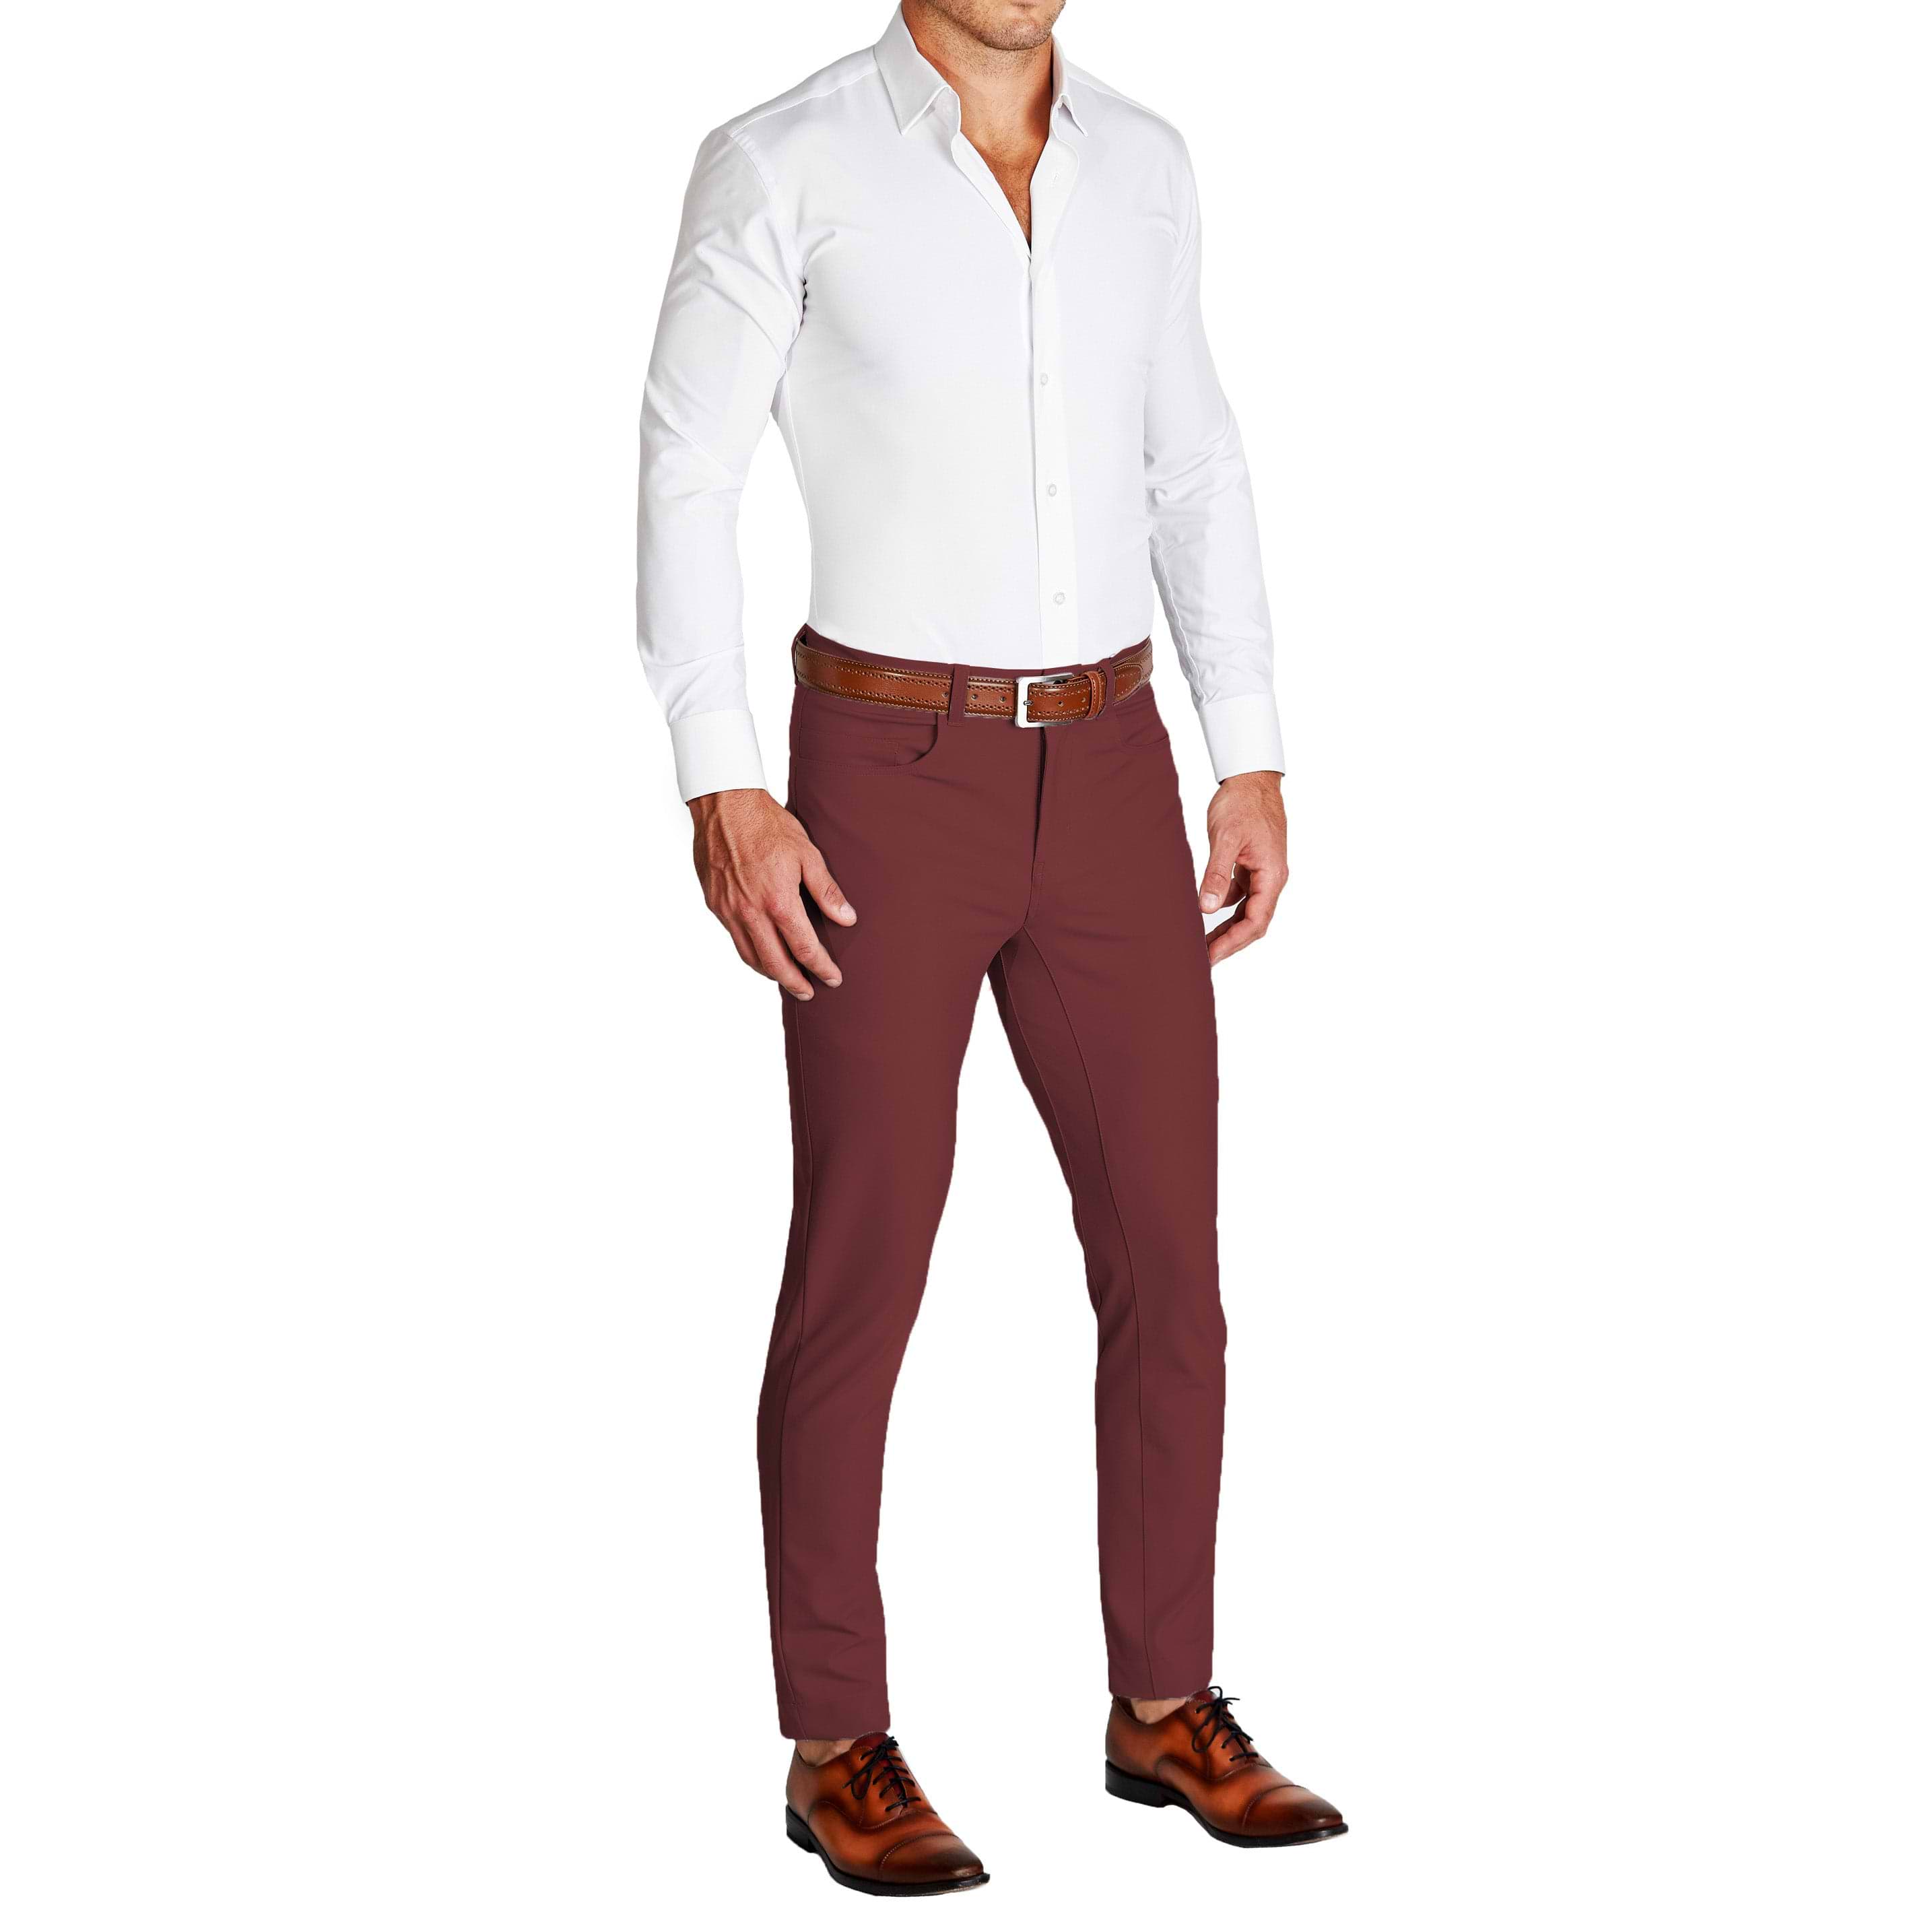 Ruhella Fashion Men Solid Casual Maroon Shirt - Buy Ruhella Fashion Men  Solid Casual Maroon Shirt Online at Best Prices in India | Flipkart.com